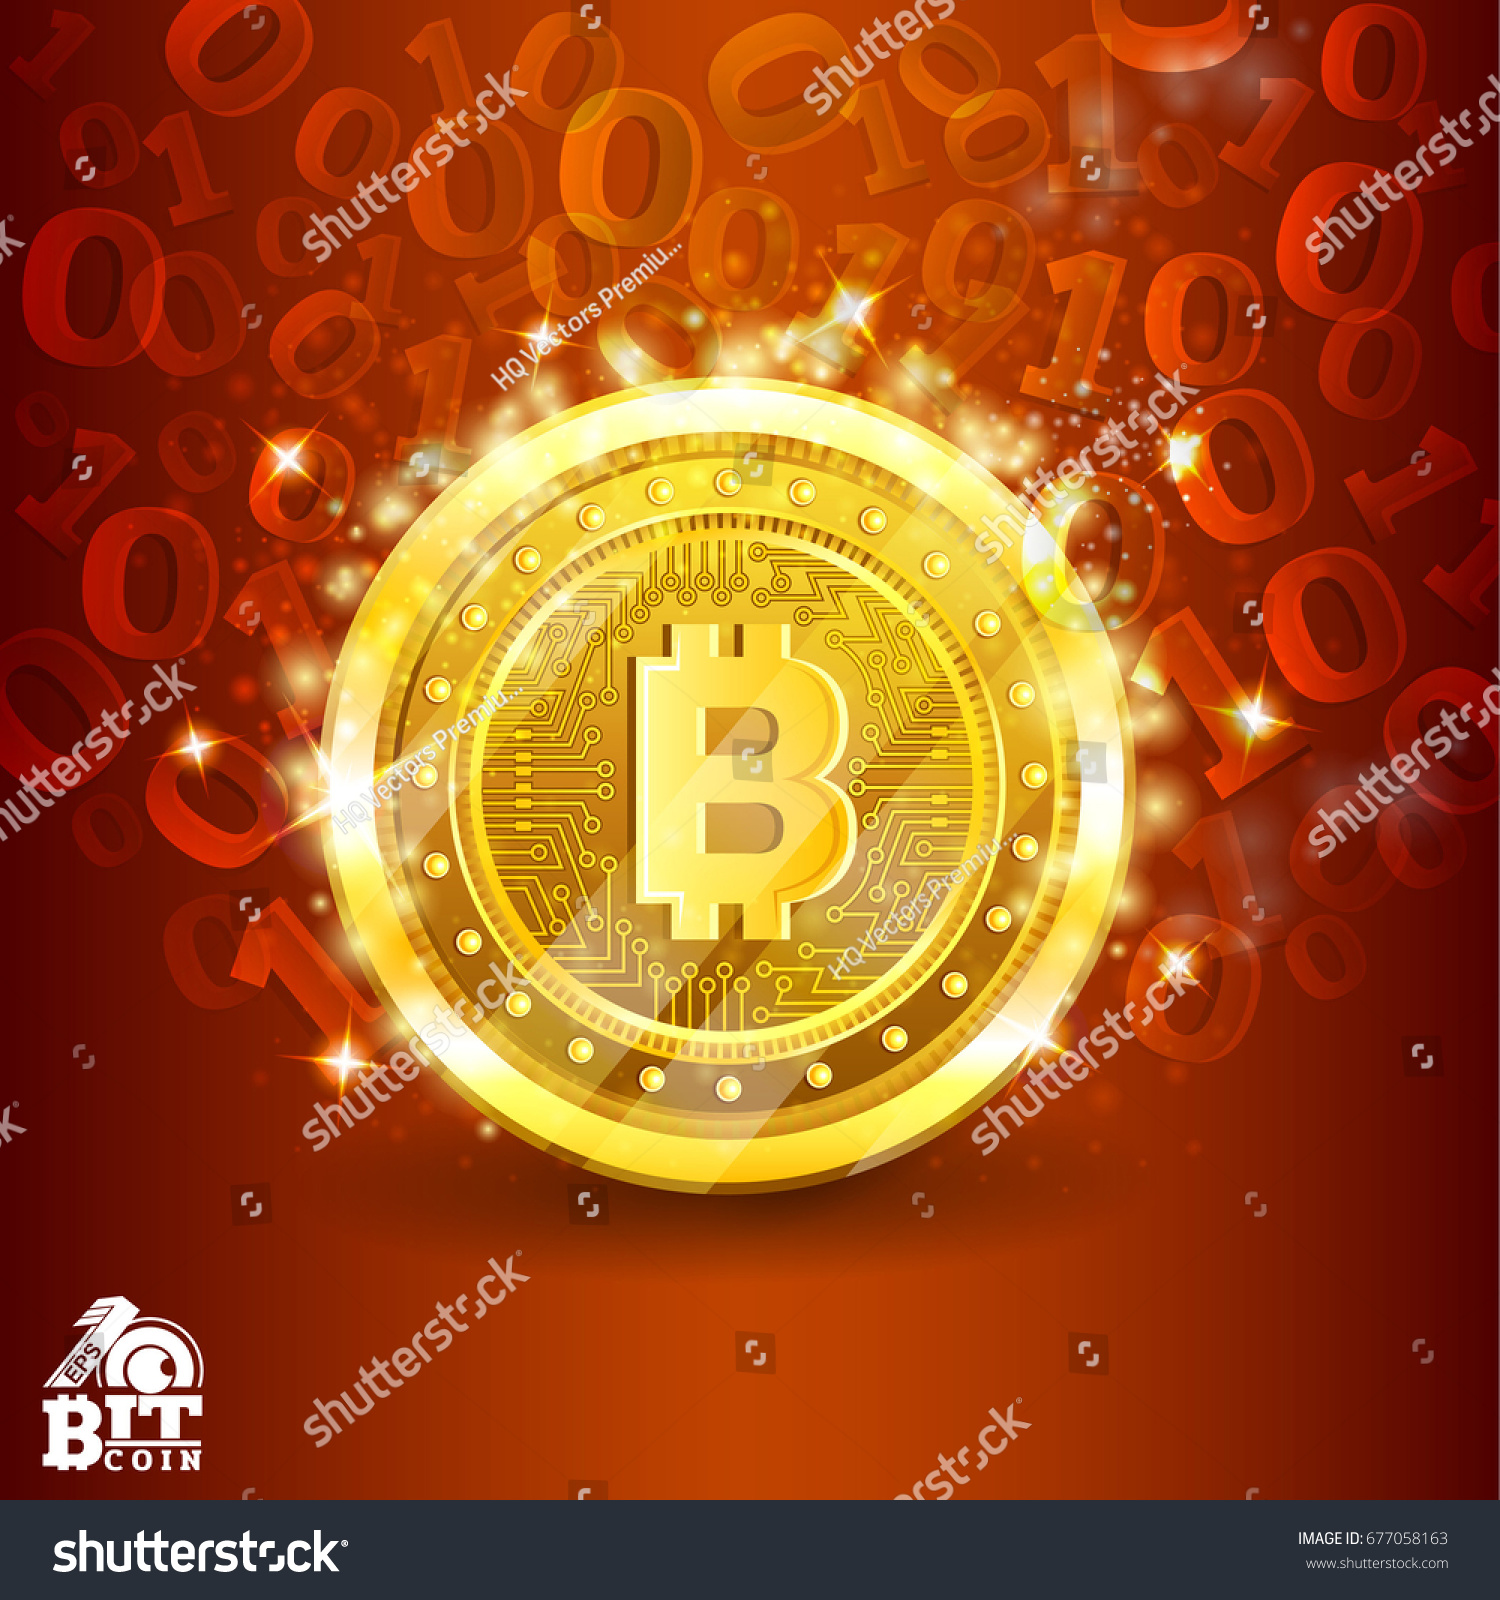 SVG of Golden bit coin in the center of red background with binary code. Abstract vector glossy business background svg